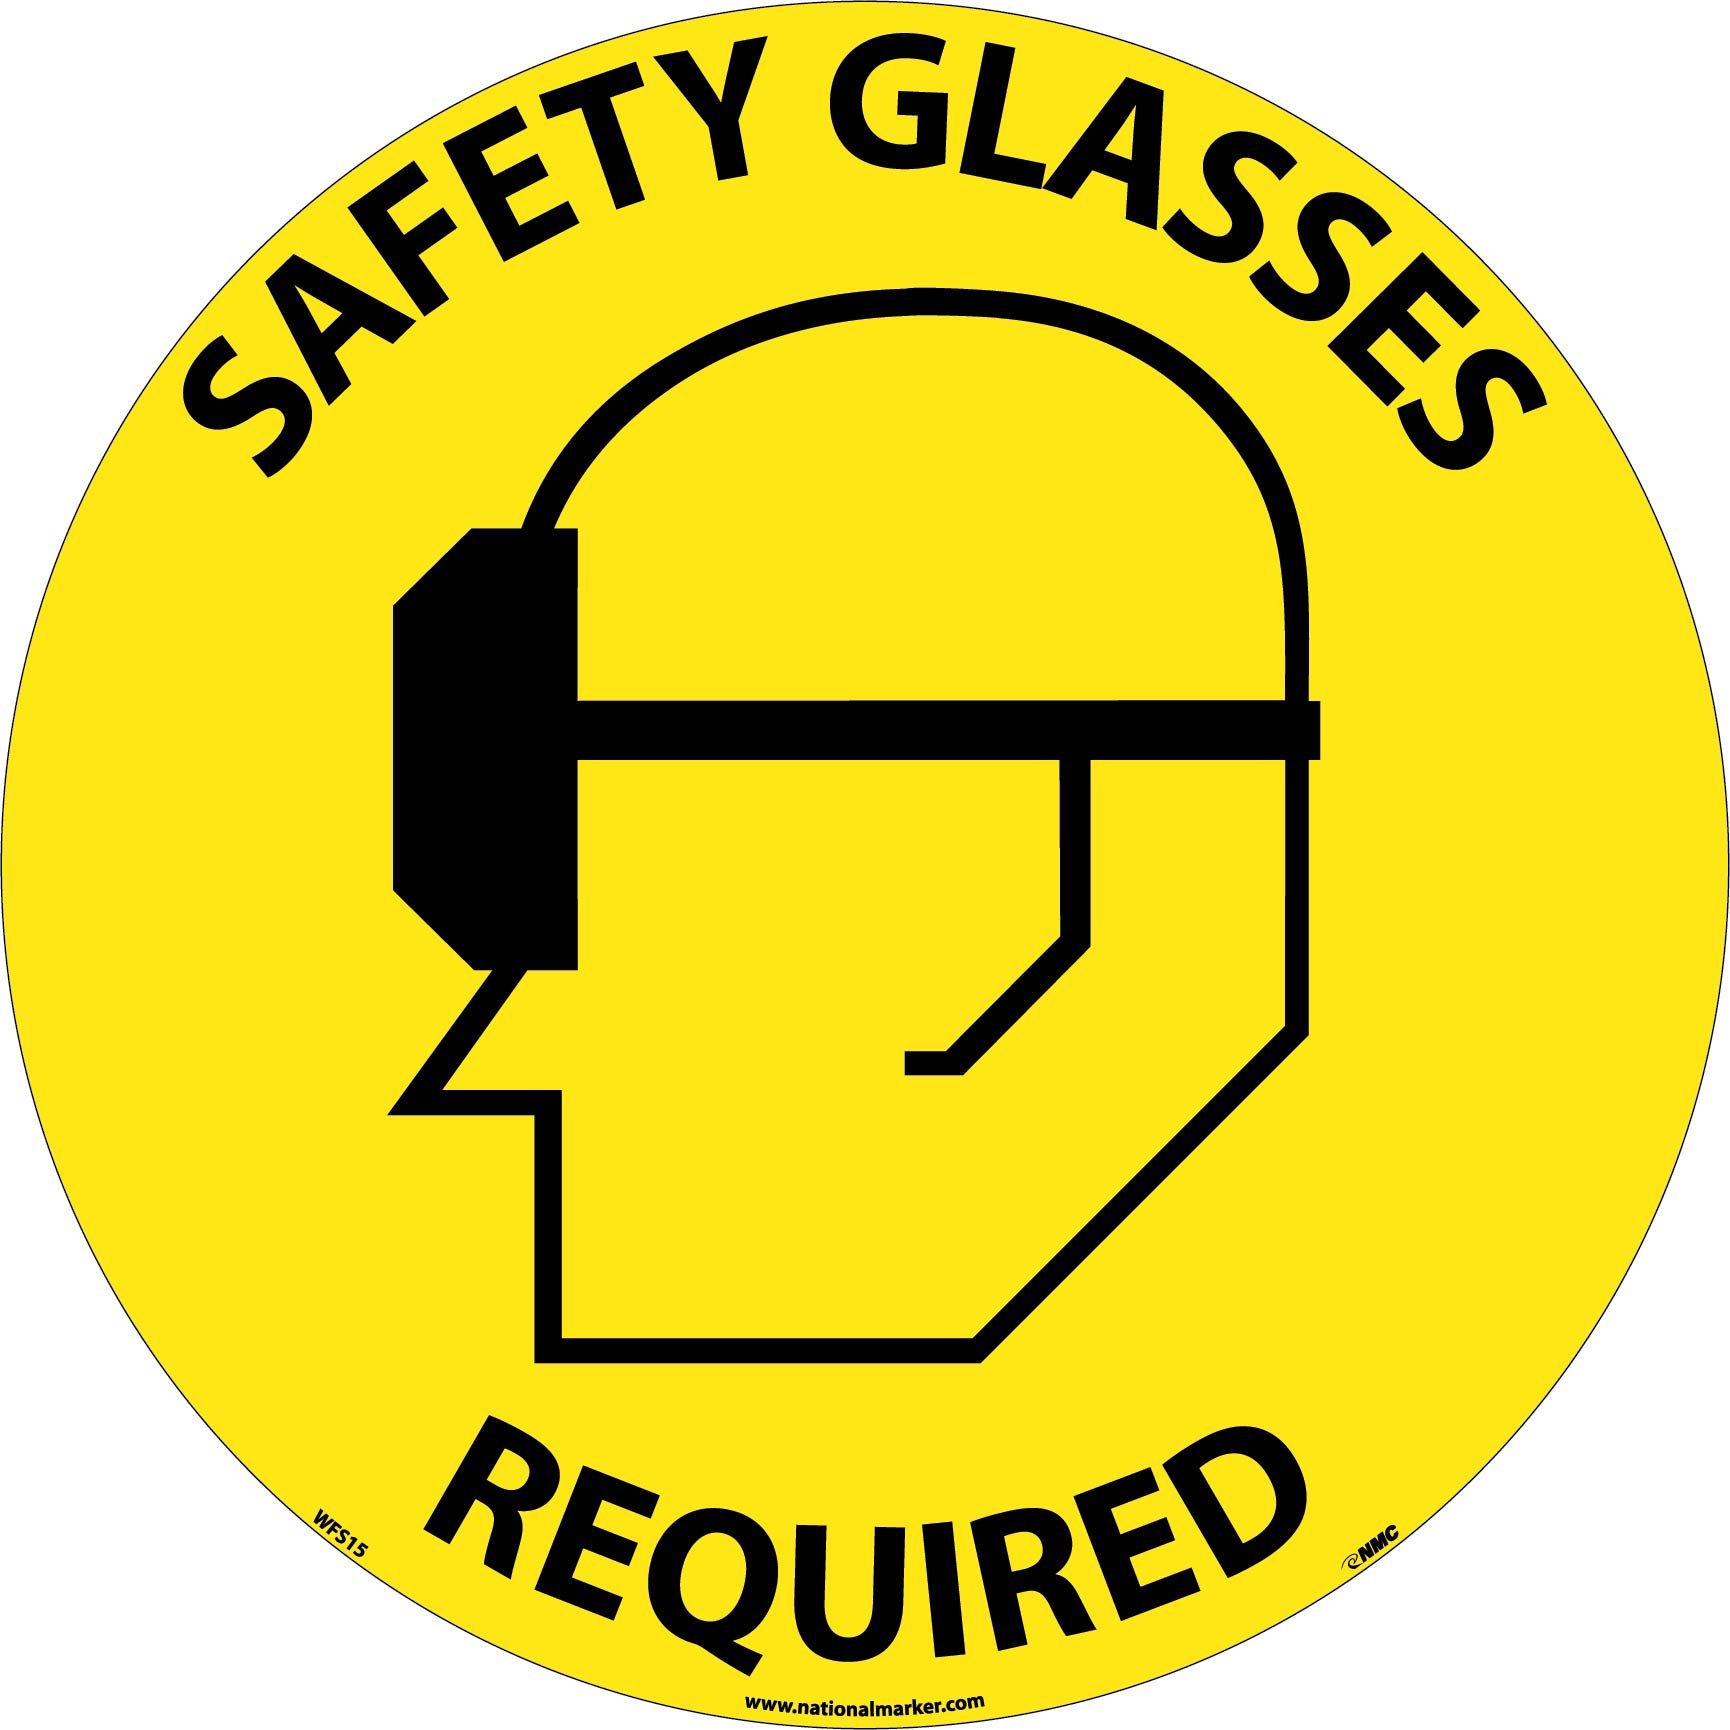 Free Safety Clip Art Pictures - Clipartix